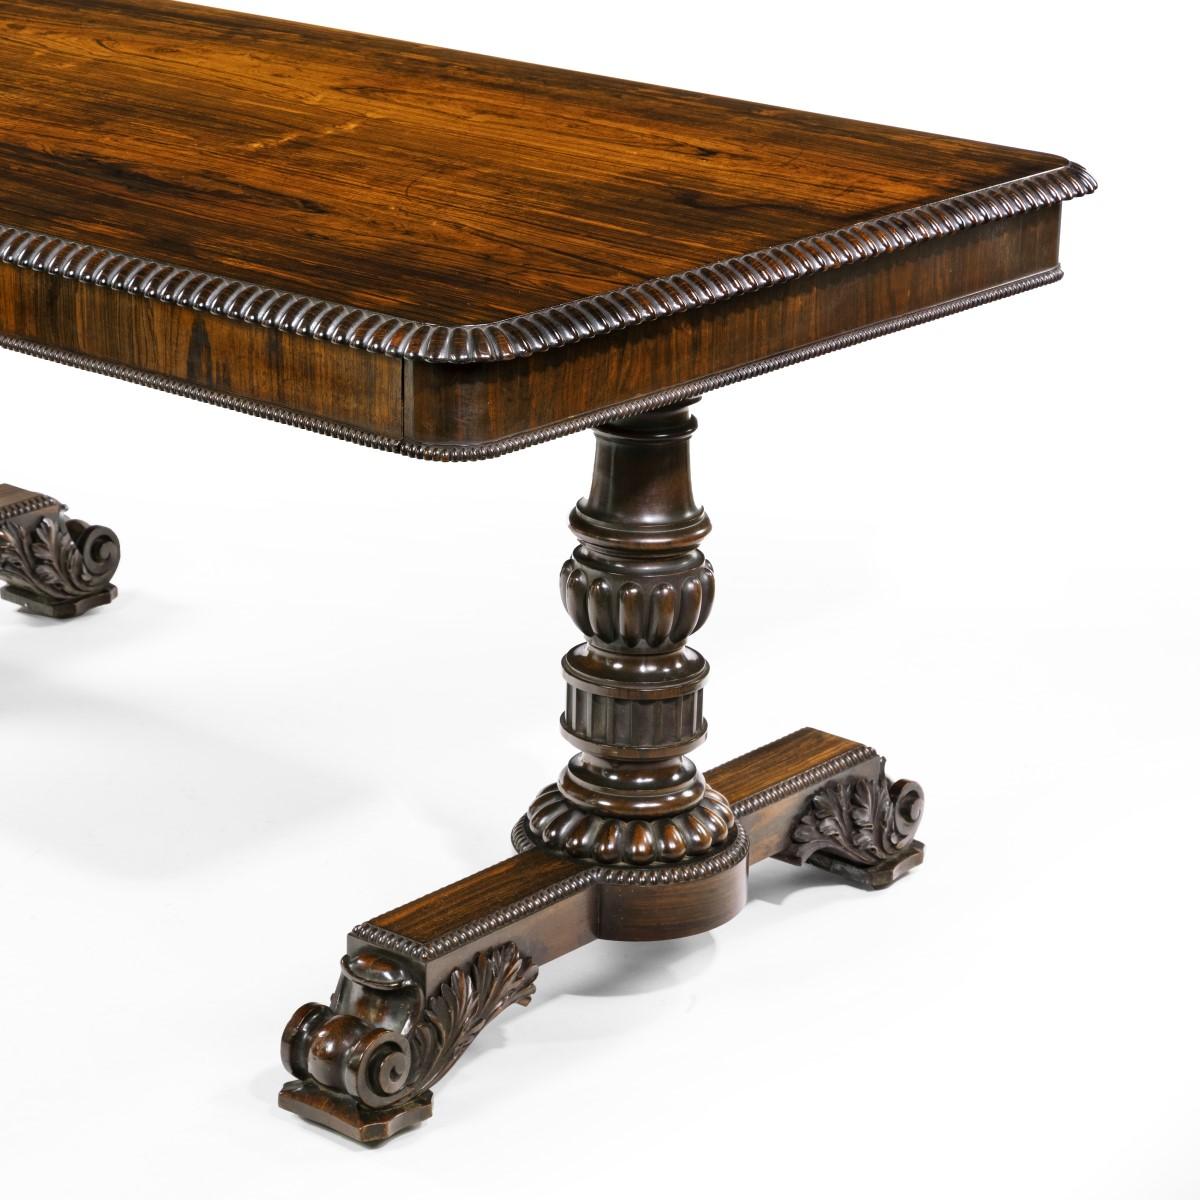 English William iv Rosewood Partners’ Library Table by Gillows